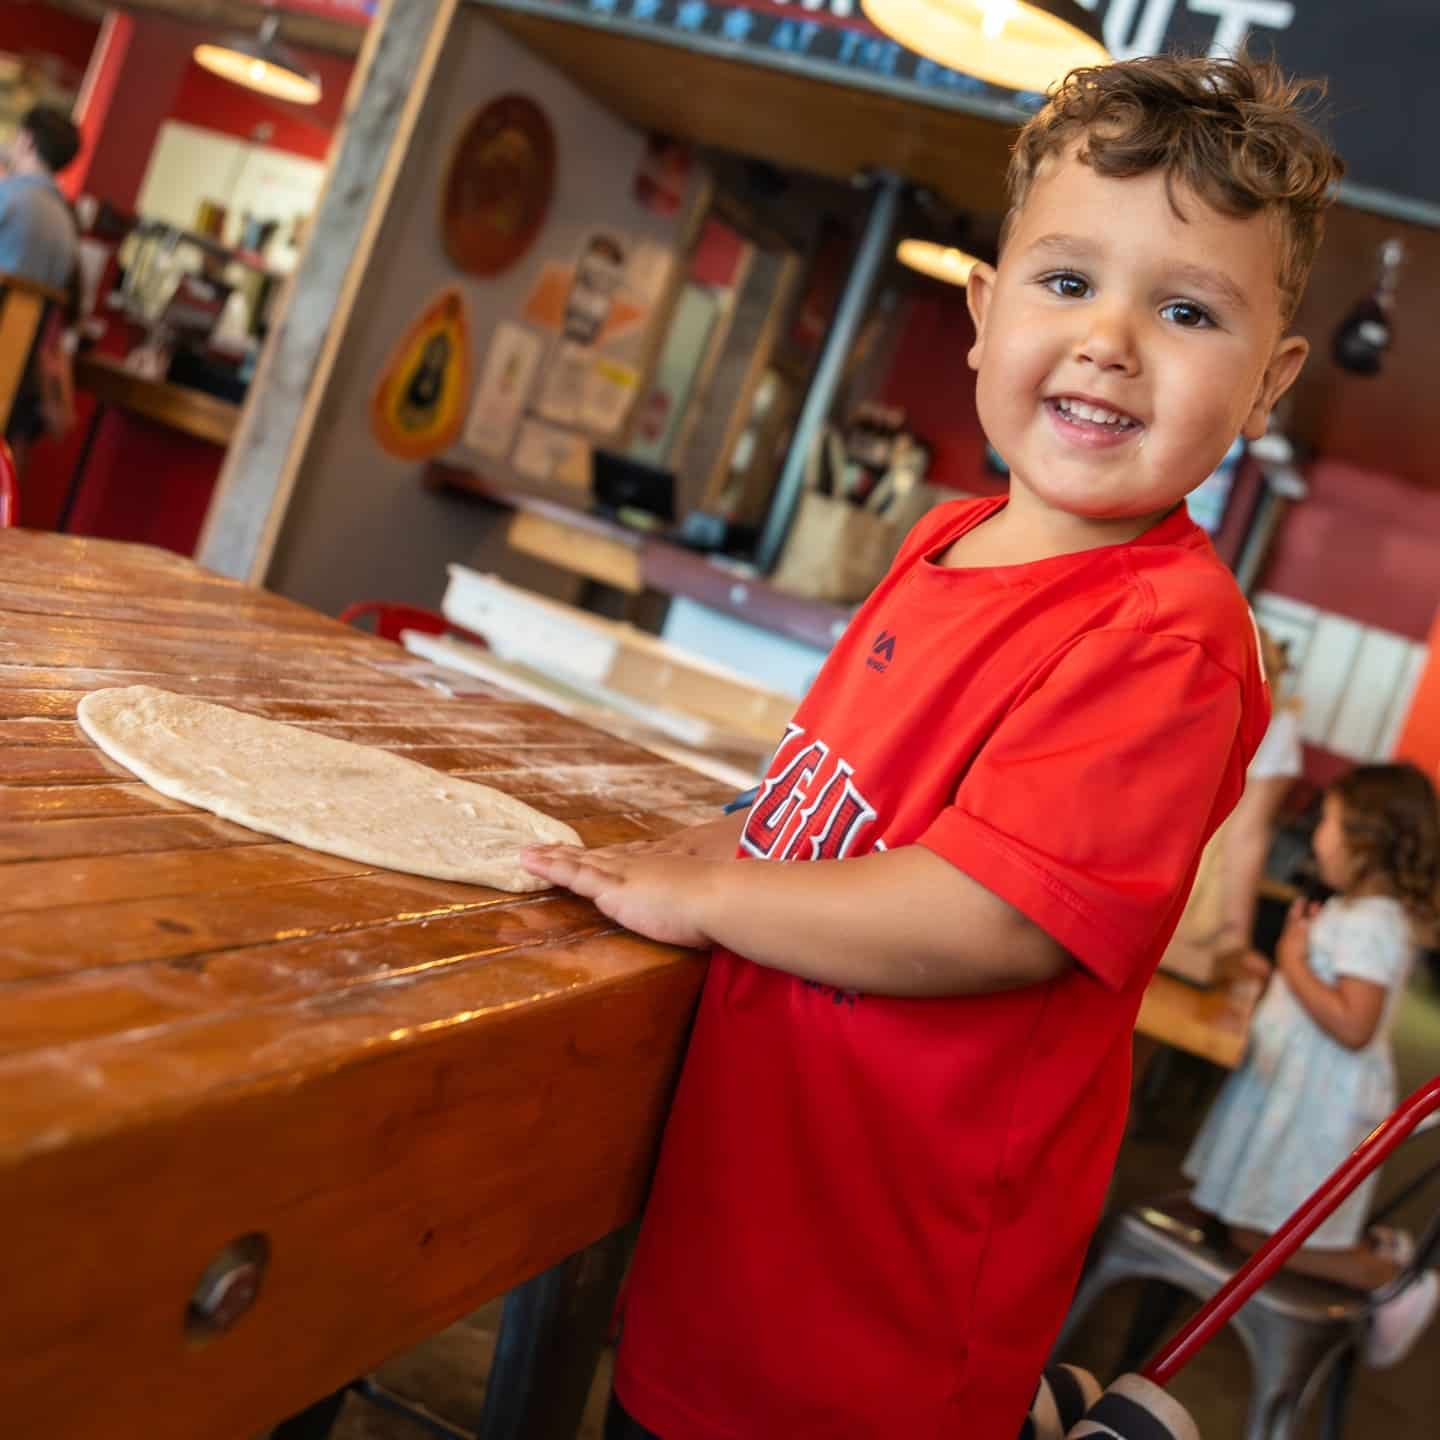 Hard Knox Pizza also has temporary tattoos, dough for the kids to play with, and some fun coloring sheets.jpg